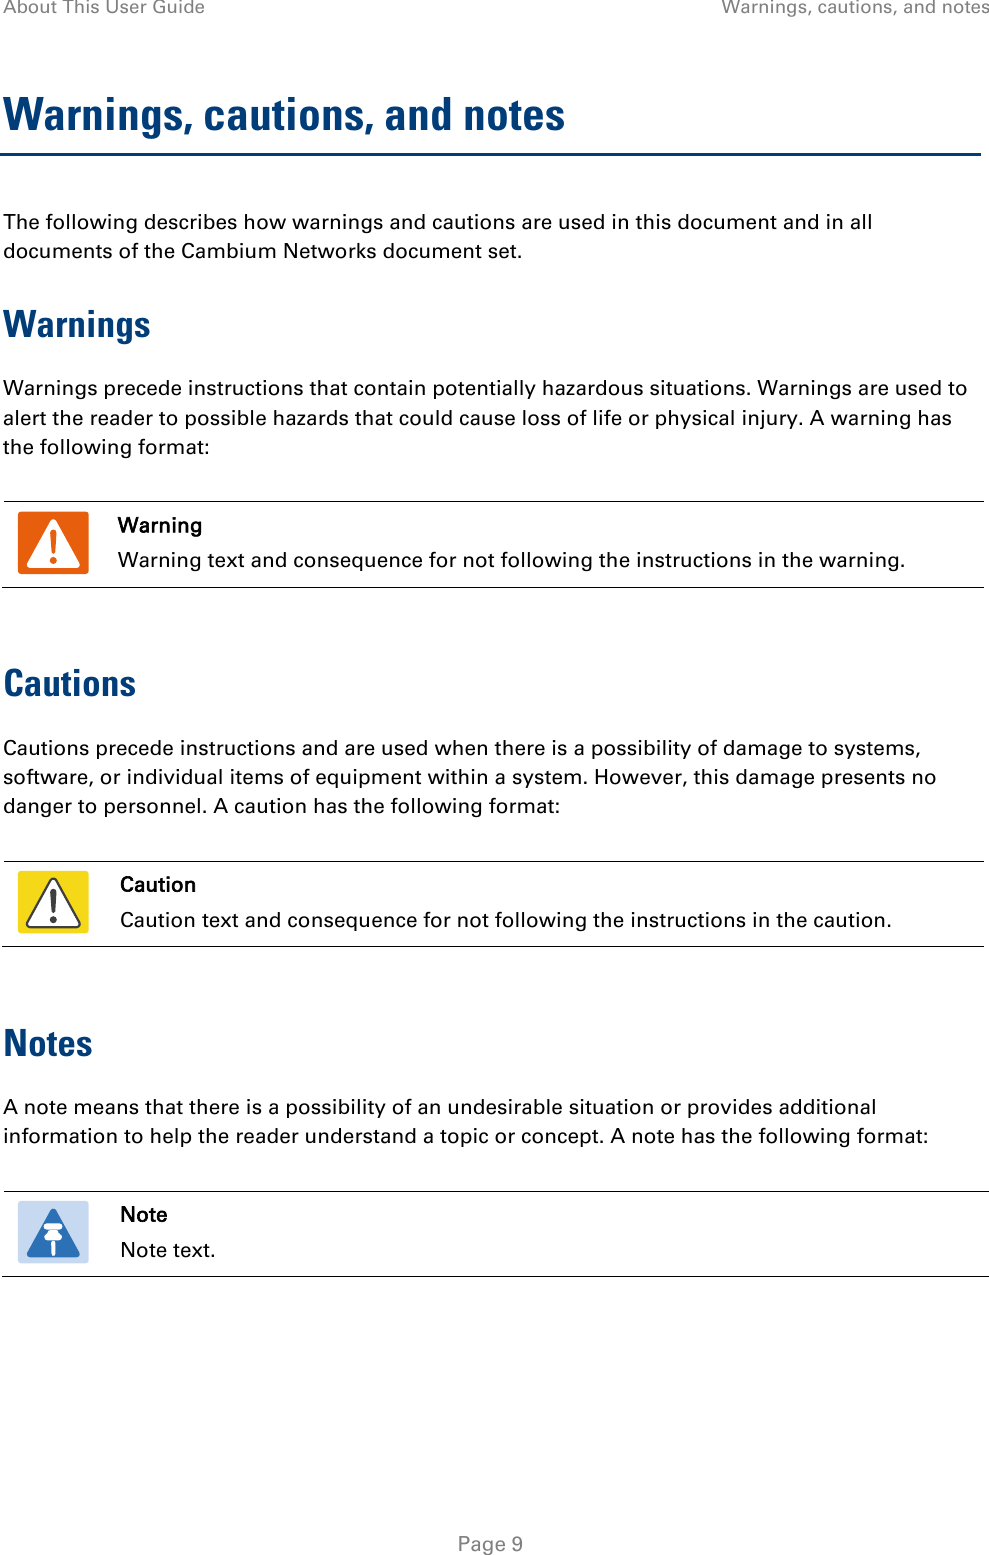 About This User Guide Warnings, cautions, and notes  Warnings, cautions, and notes The following describes how warnings and cautions are used in this document and in all documents of the Cambium Networks document set. Warnings Warnings precede instructions that contain potentially hazardous situations. Warnings are used to alert the reader to possible hazards that could cause loss of life or physical injury. A warning has the following format:   Warning Warning text and consequence for not following the instructions in the warning.  Cautions Cautions precede instructions and are used when there is a possibility of damage to systems, software, or individual items of equipment within a system. However, this damage presents no danger to personnel. A caution has the following format:   Caution Caution text and consequence for not following the instructions in the caution.  Notes A note means that there is a possibility of an undesirable situation or provides additional information to help the reader understand a topic or concept. A note has the following format:   Note Note text.   Page 9 